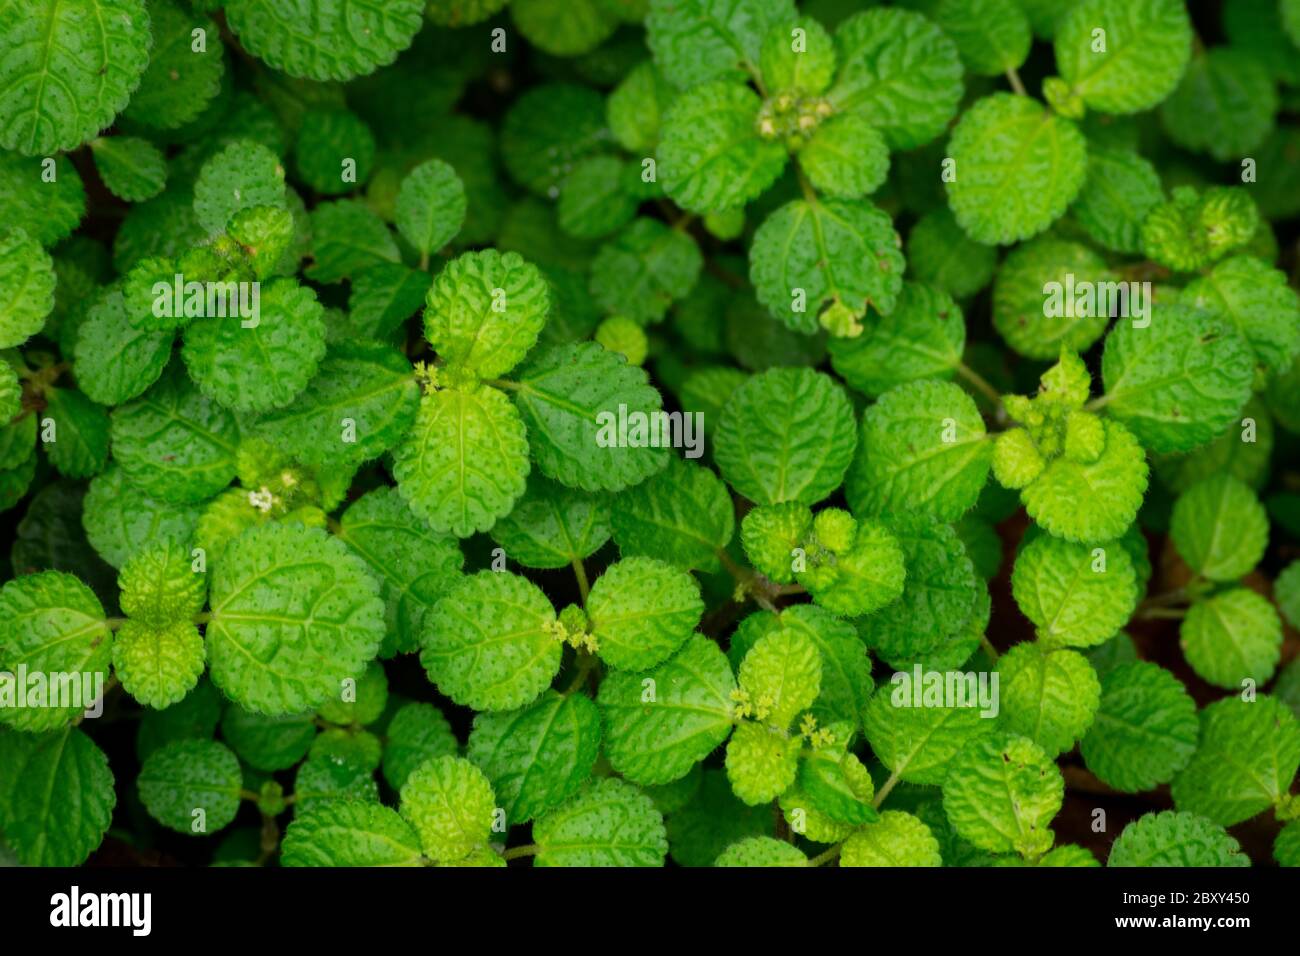 little round green leaves in close-up Stock Photo